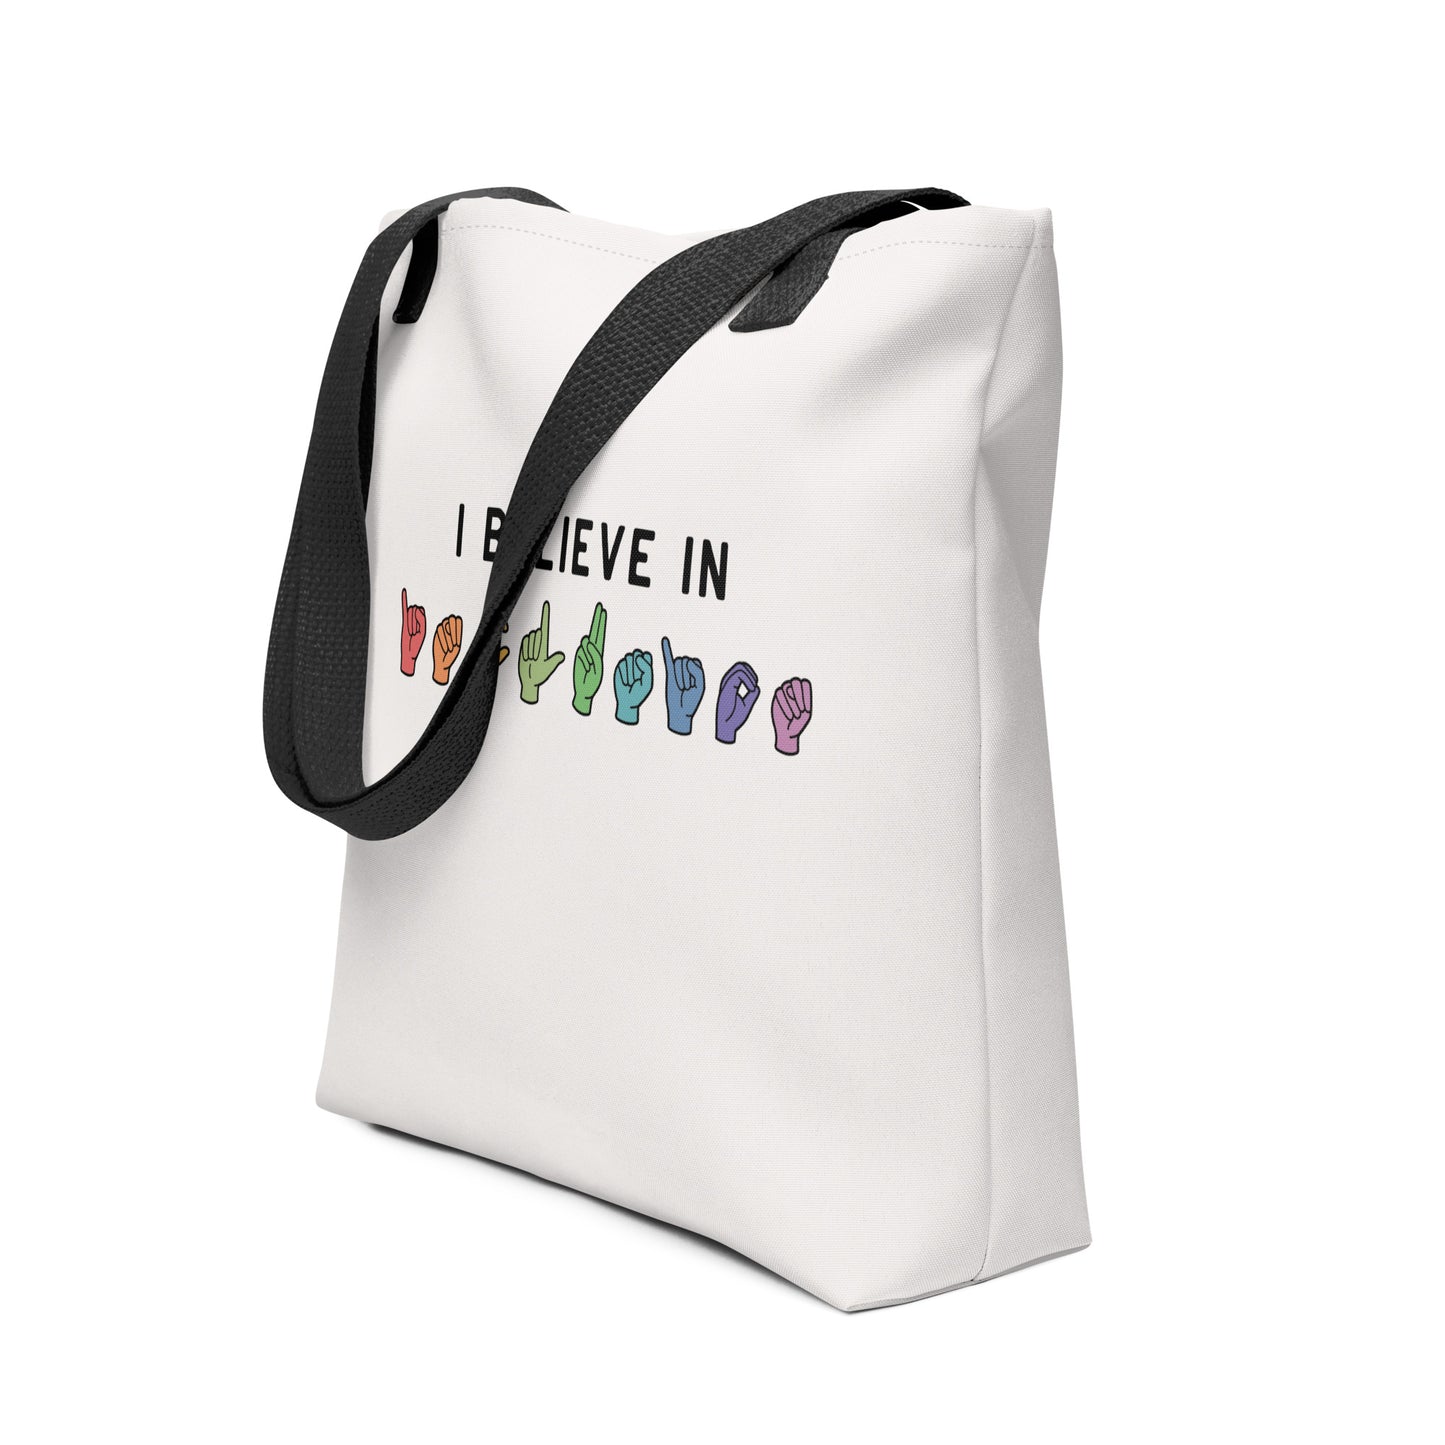 I Believe in Inclusion | Rainbow | Tote